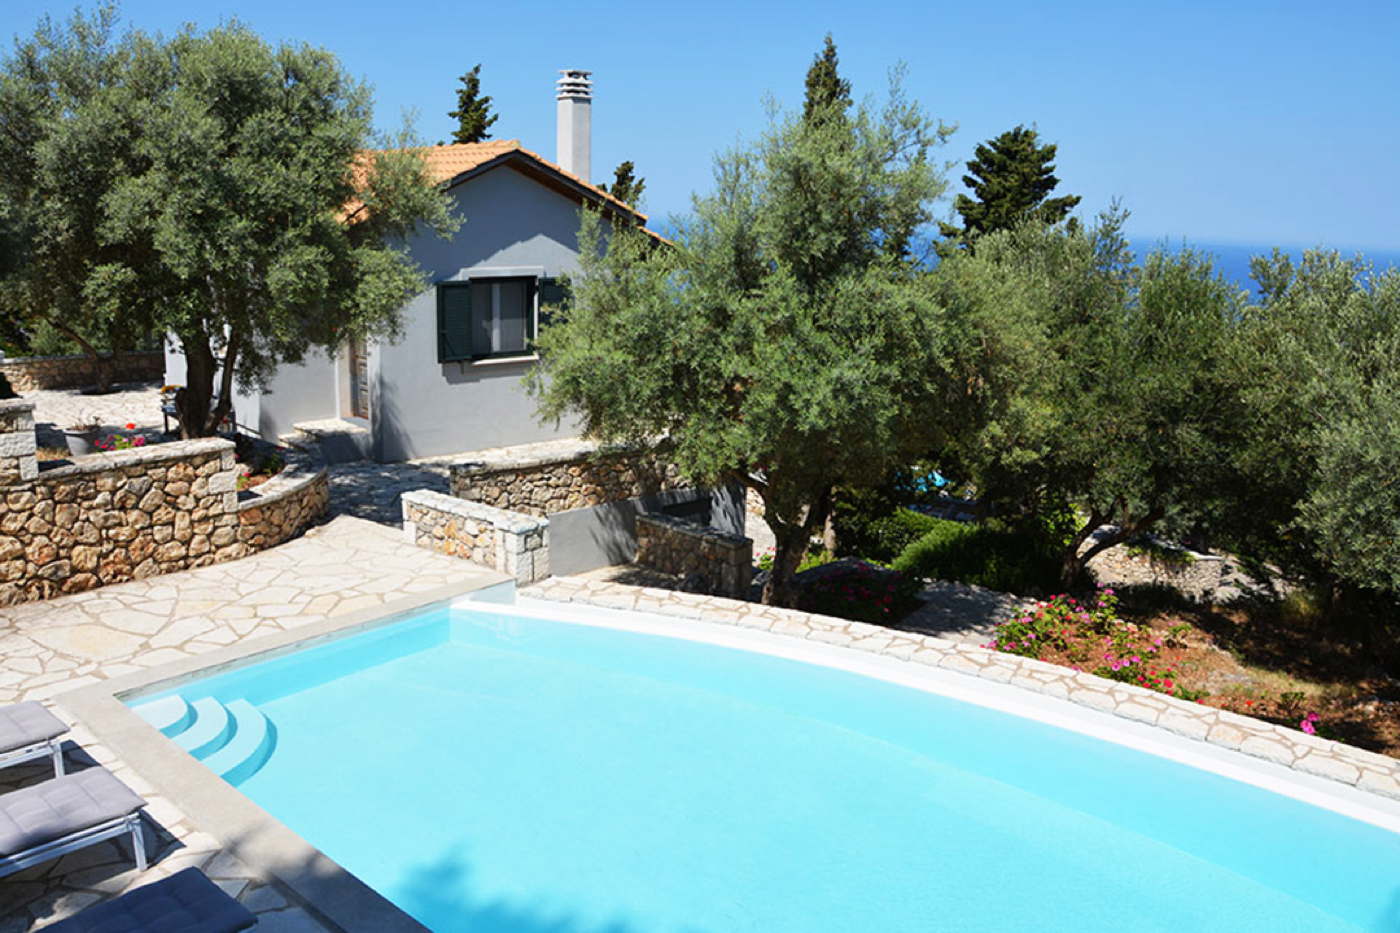 Holiday rental homes in Lefkada with pool for rent at DOMIZILE REISEN